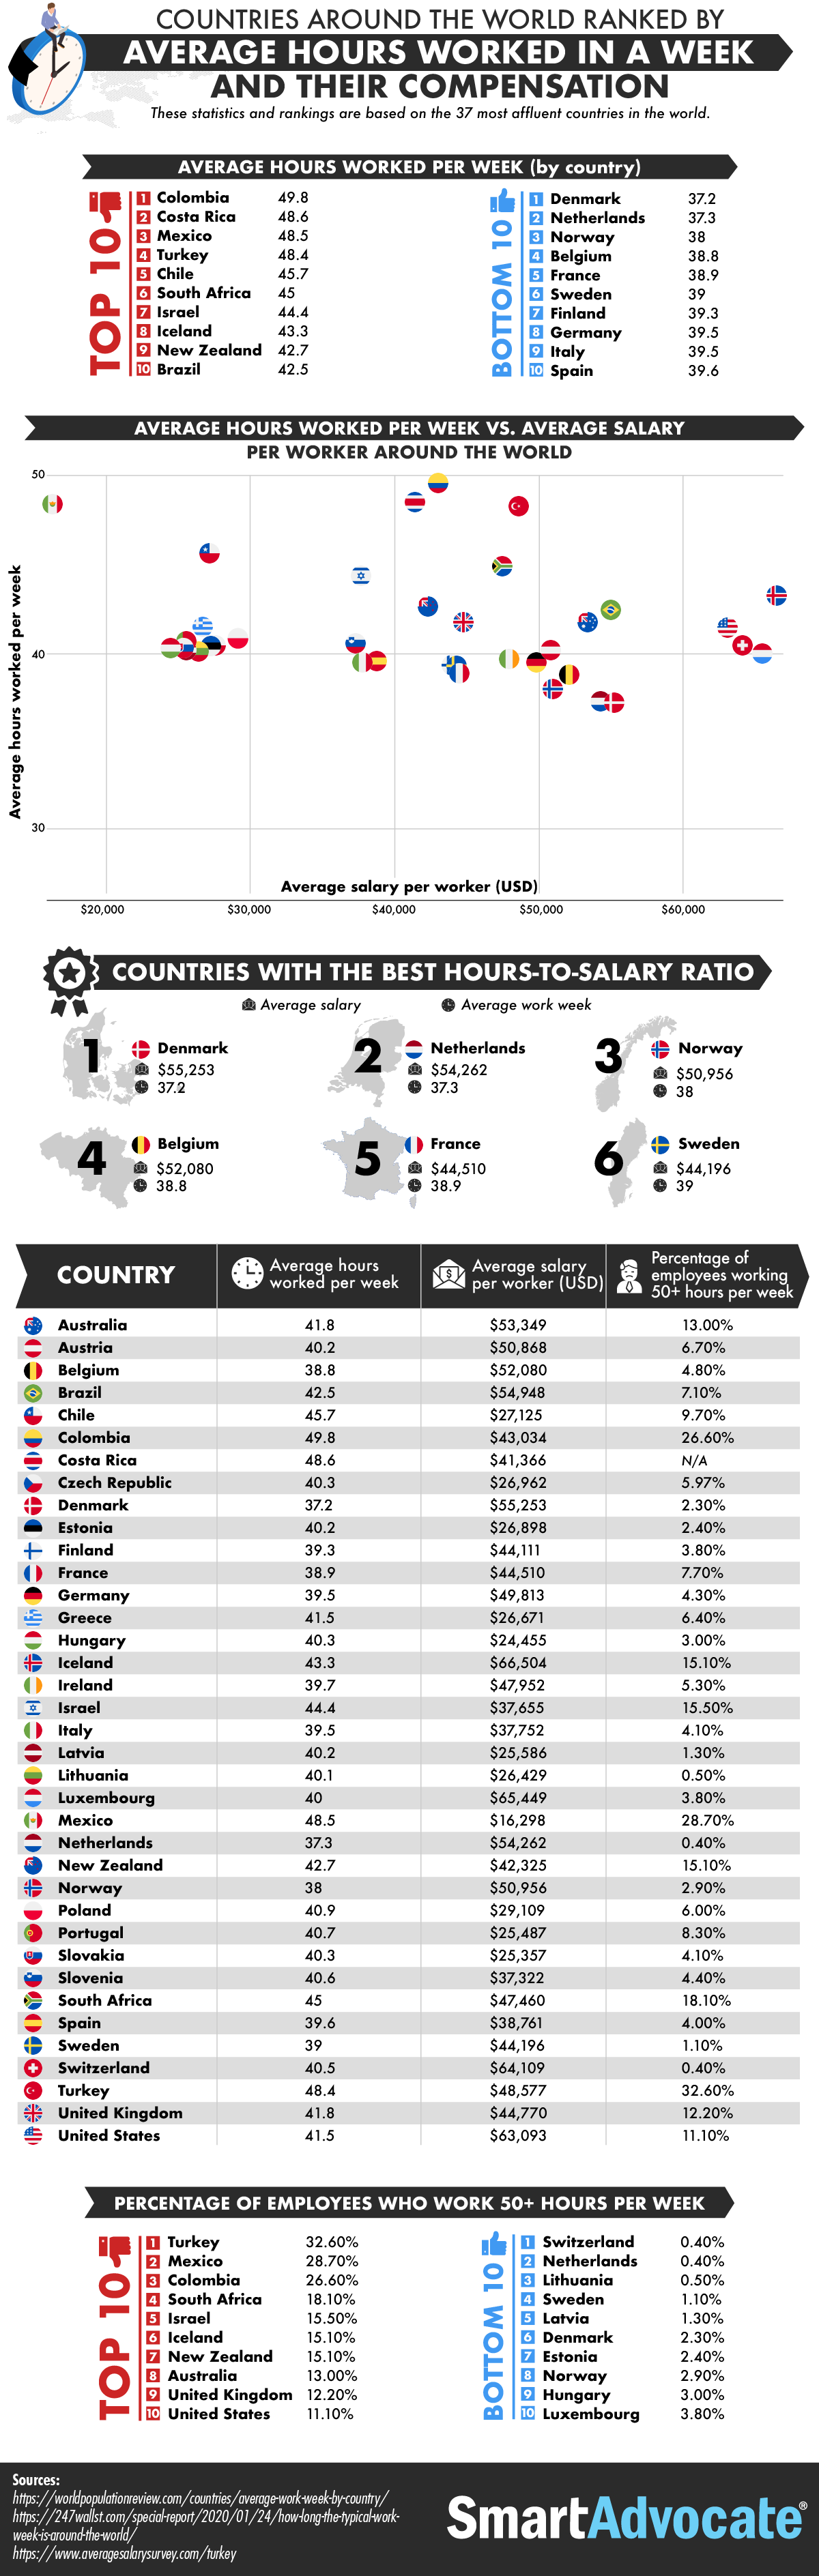 Countries Ranked By Average Hours Worked Per Week & Their Compensation